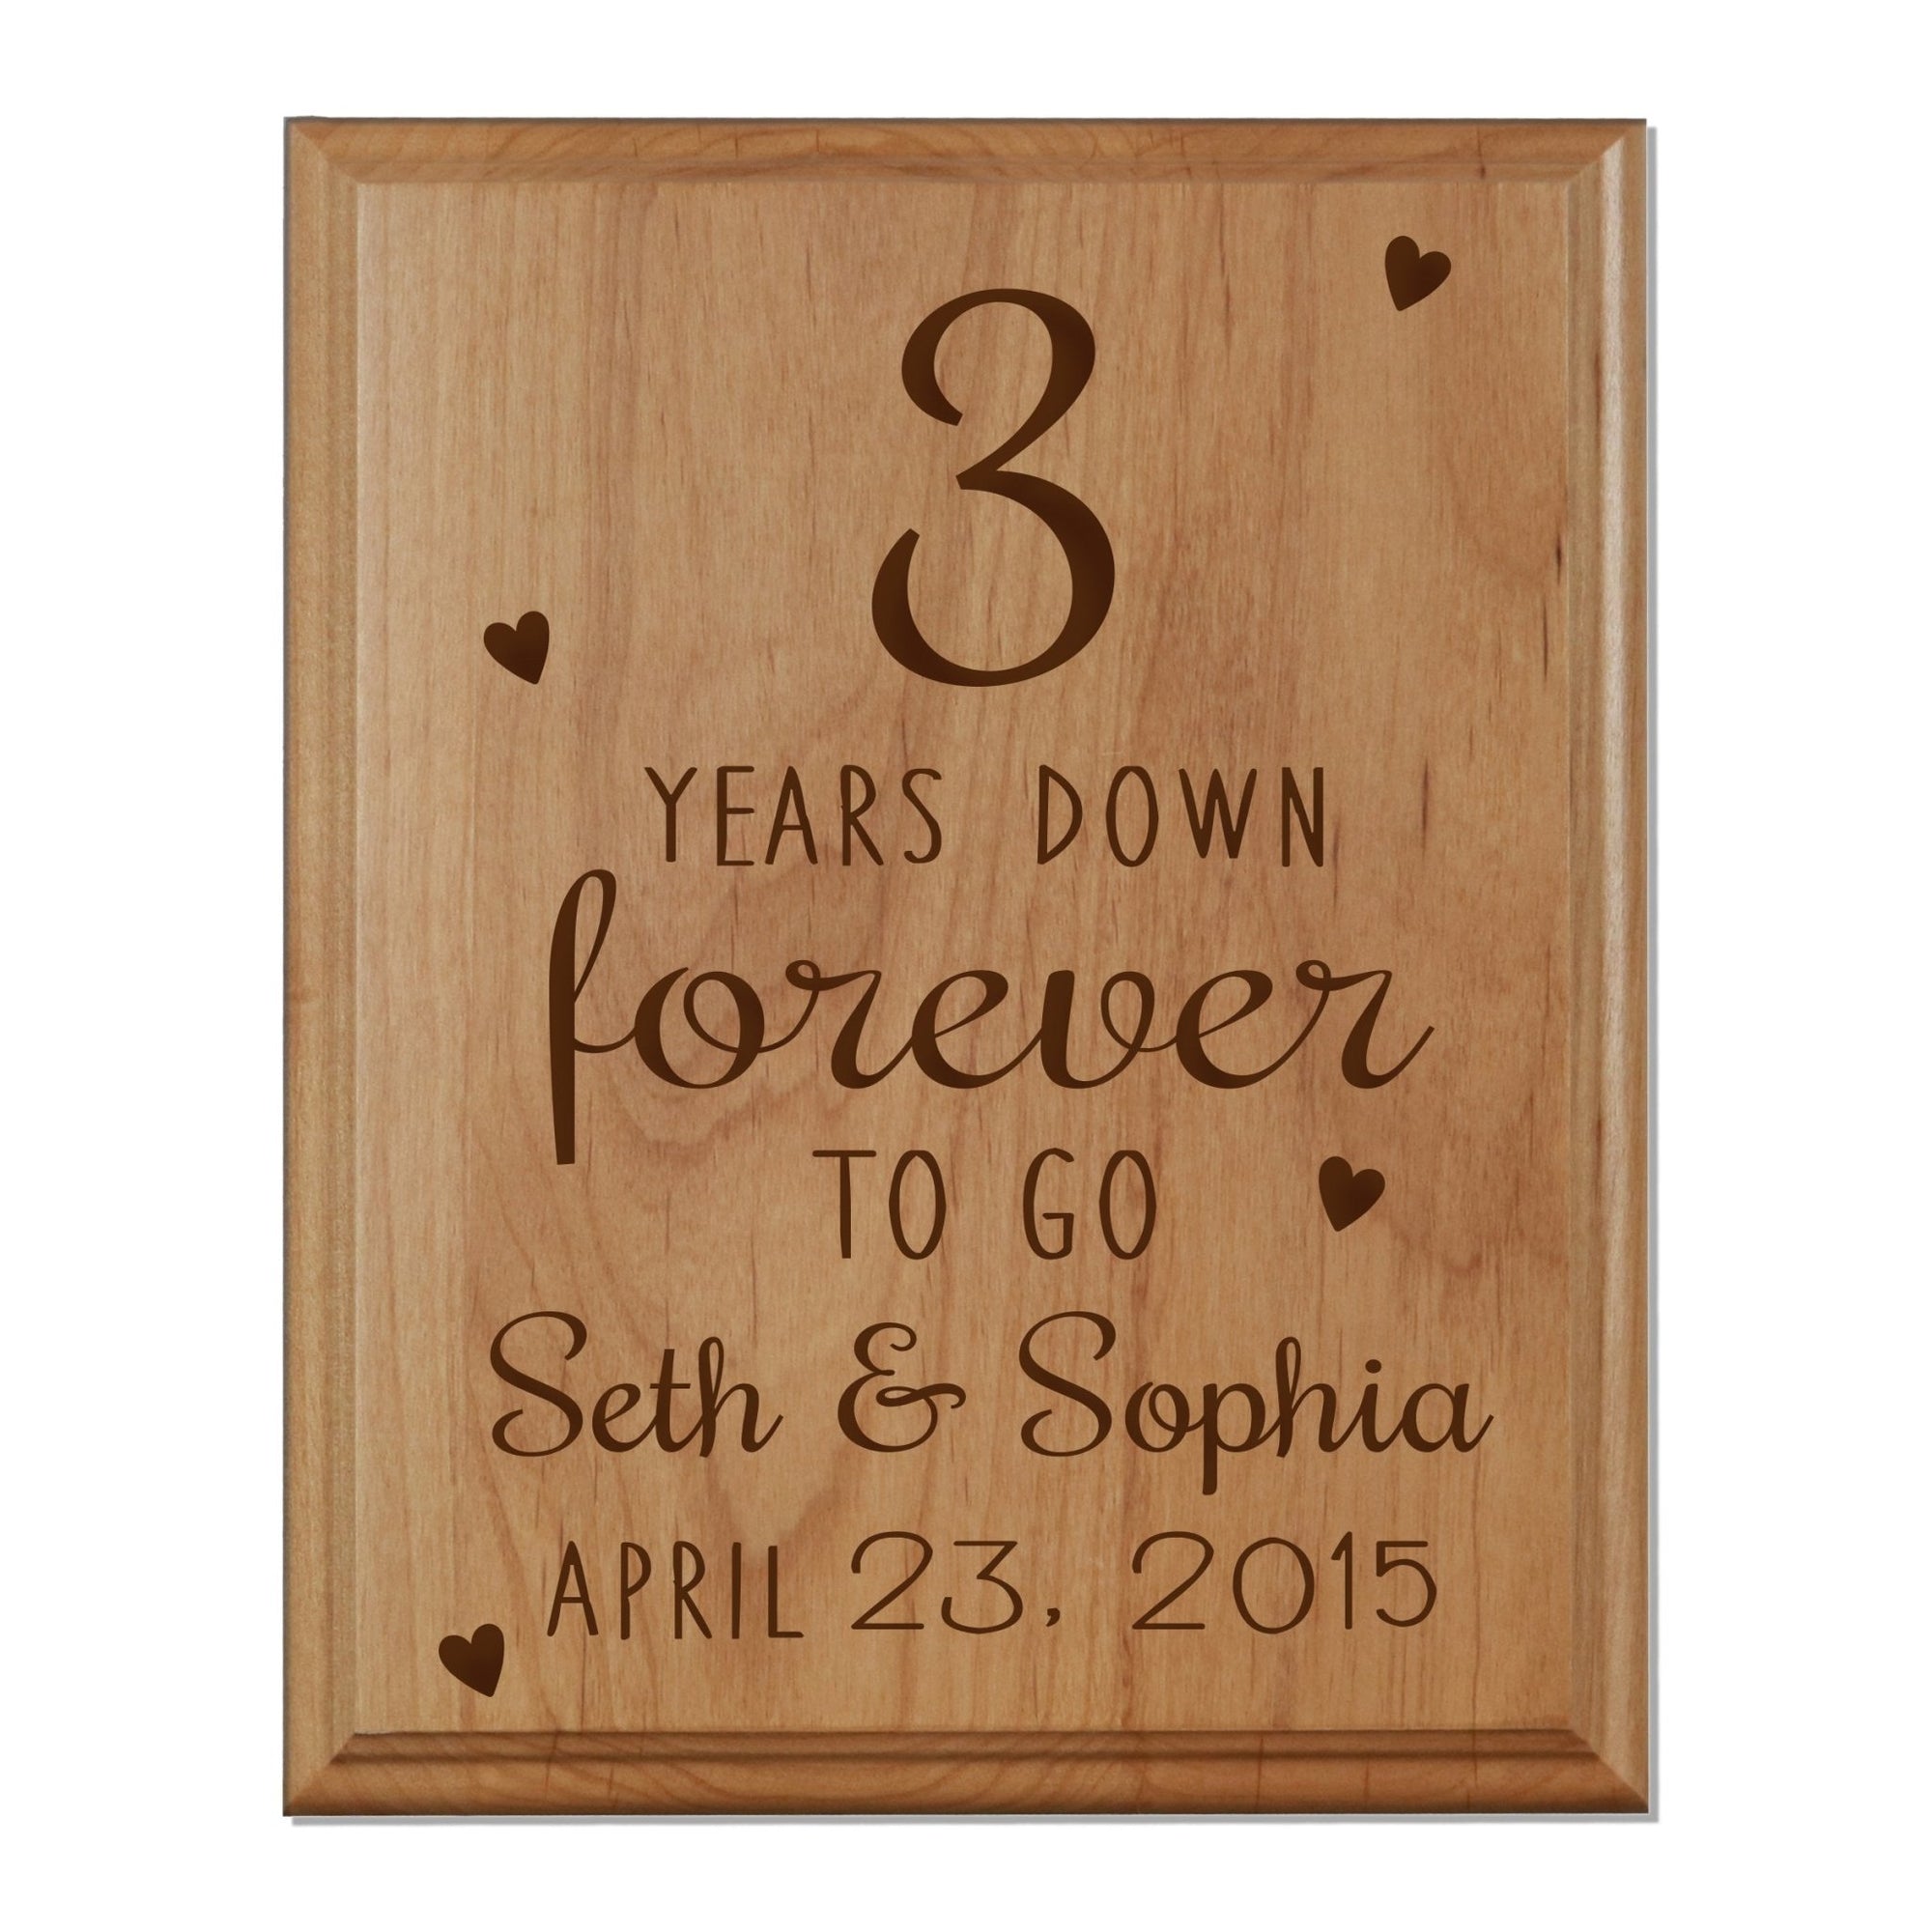 Personalized 8x10 Anniversary Plaques - 3 Year Down - LifeSong Milestones